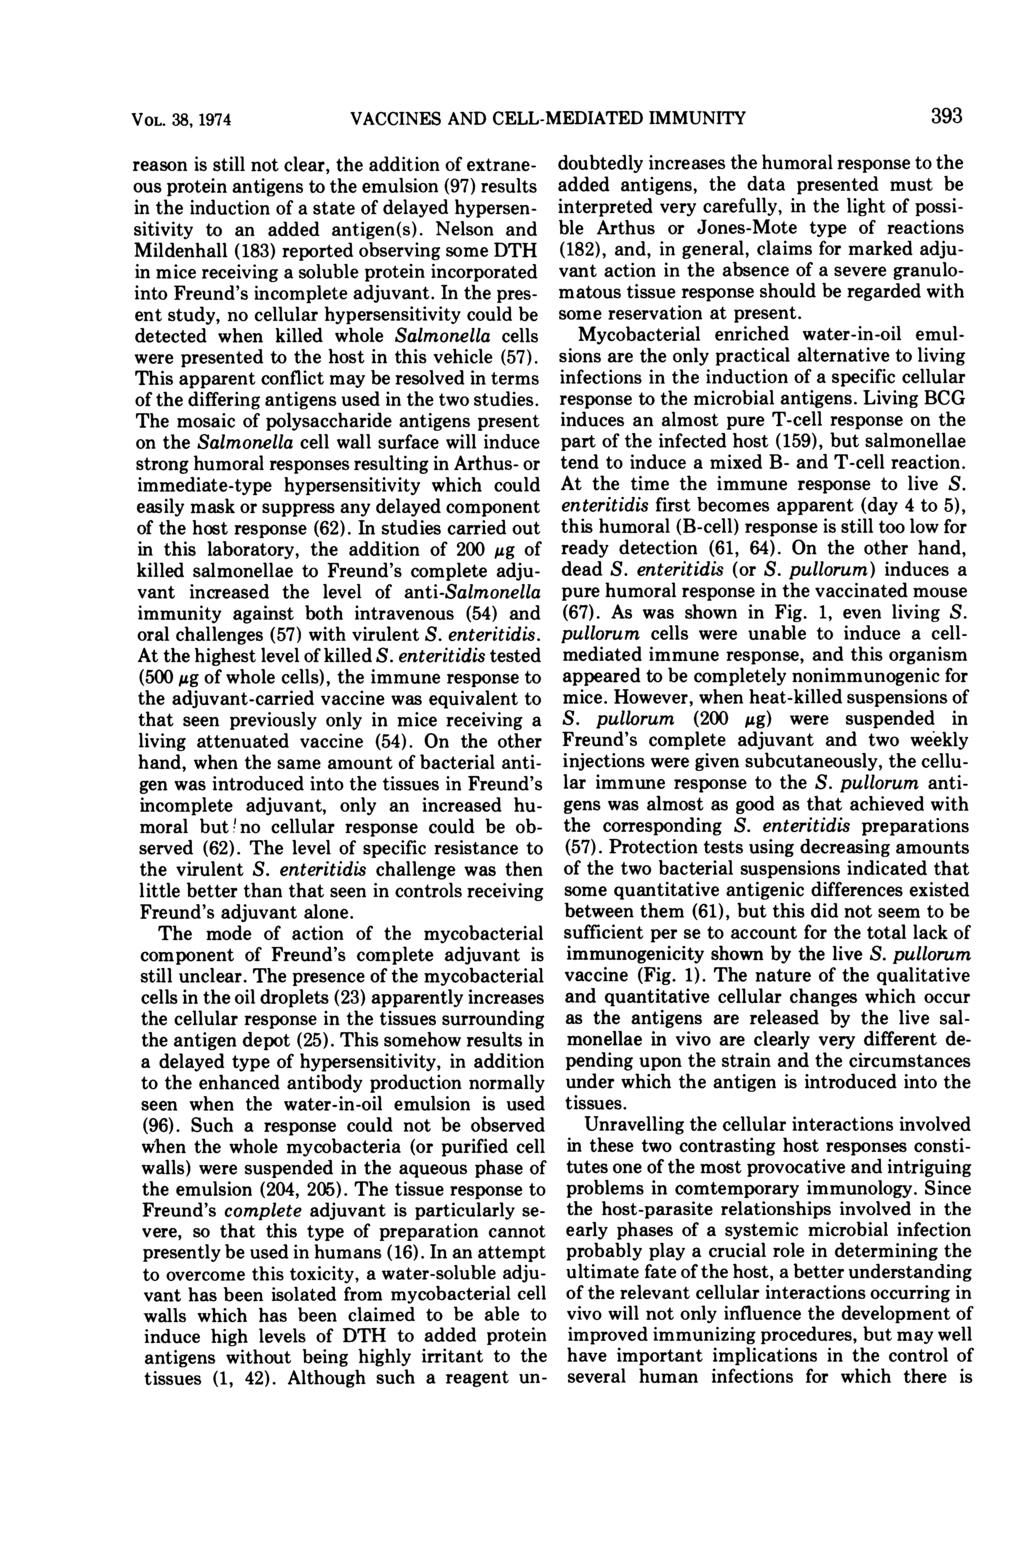 VOL. 38, 1974 VACCINES AND CELL-MEDIATED IMMUNITY reason is still not clear, the addition of extraneous protein antigens to the emulsion (97) results in the induction of a state of delayed